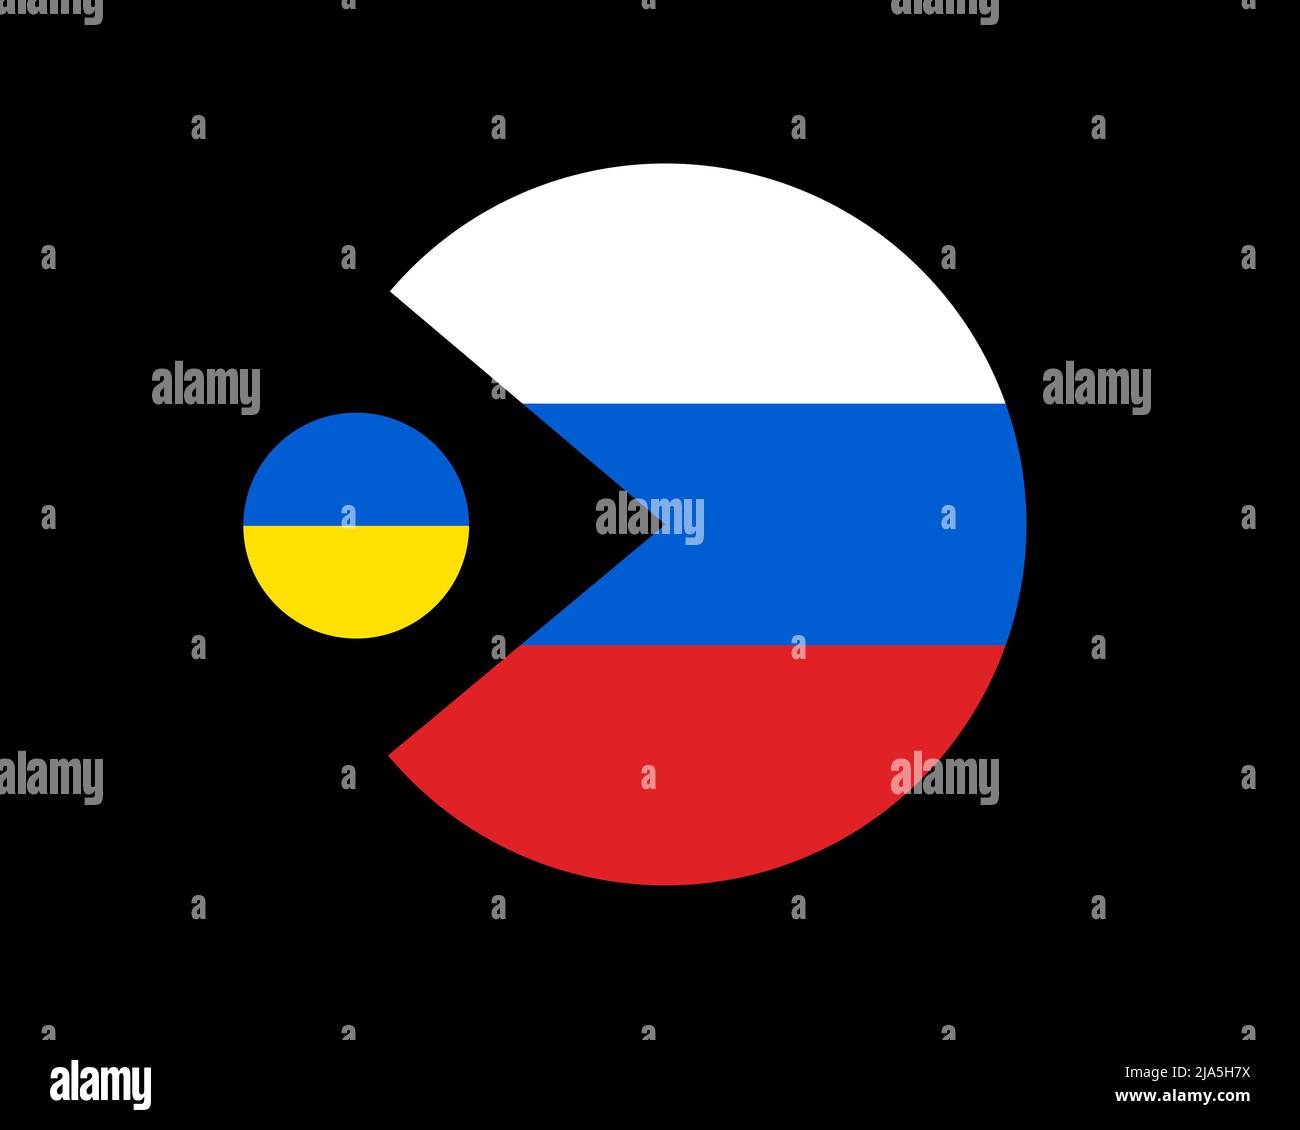 Small Ukraine is seized and captured by large Russia - Russian occupation, annexation of country and nation. Vector illustration isolated on black. Stock Photo